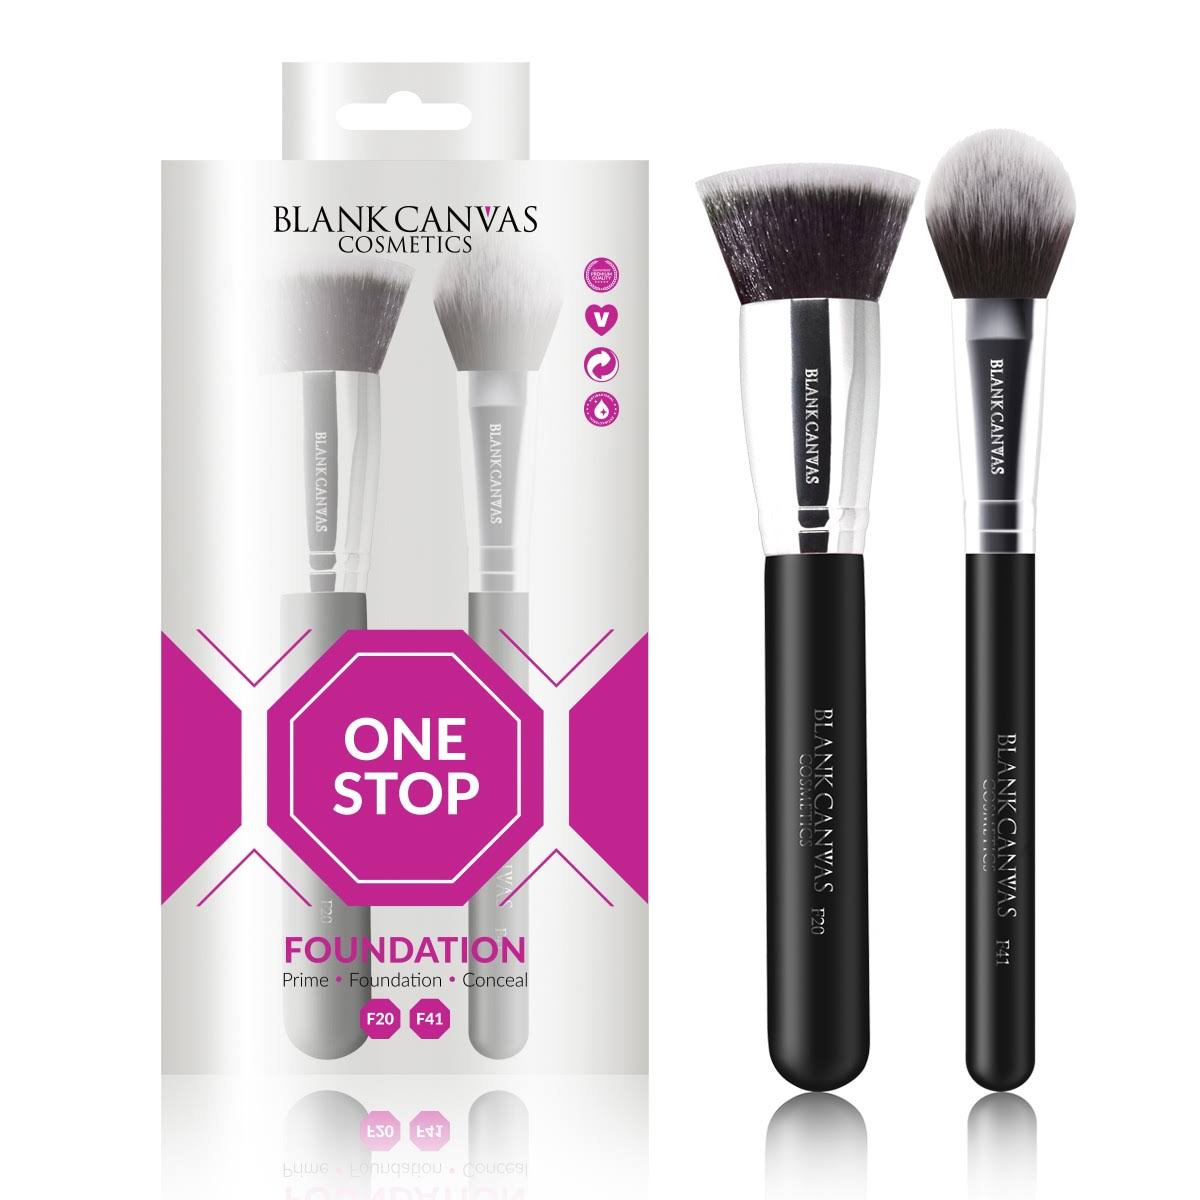 Blank Canvas Cosmetics New One Stop Foundation